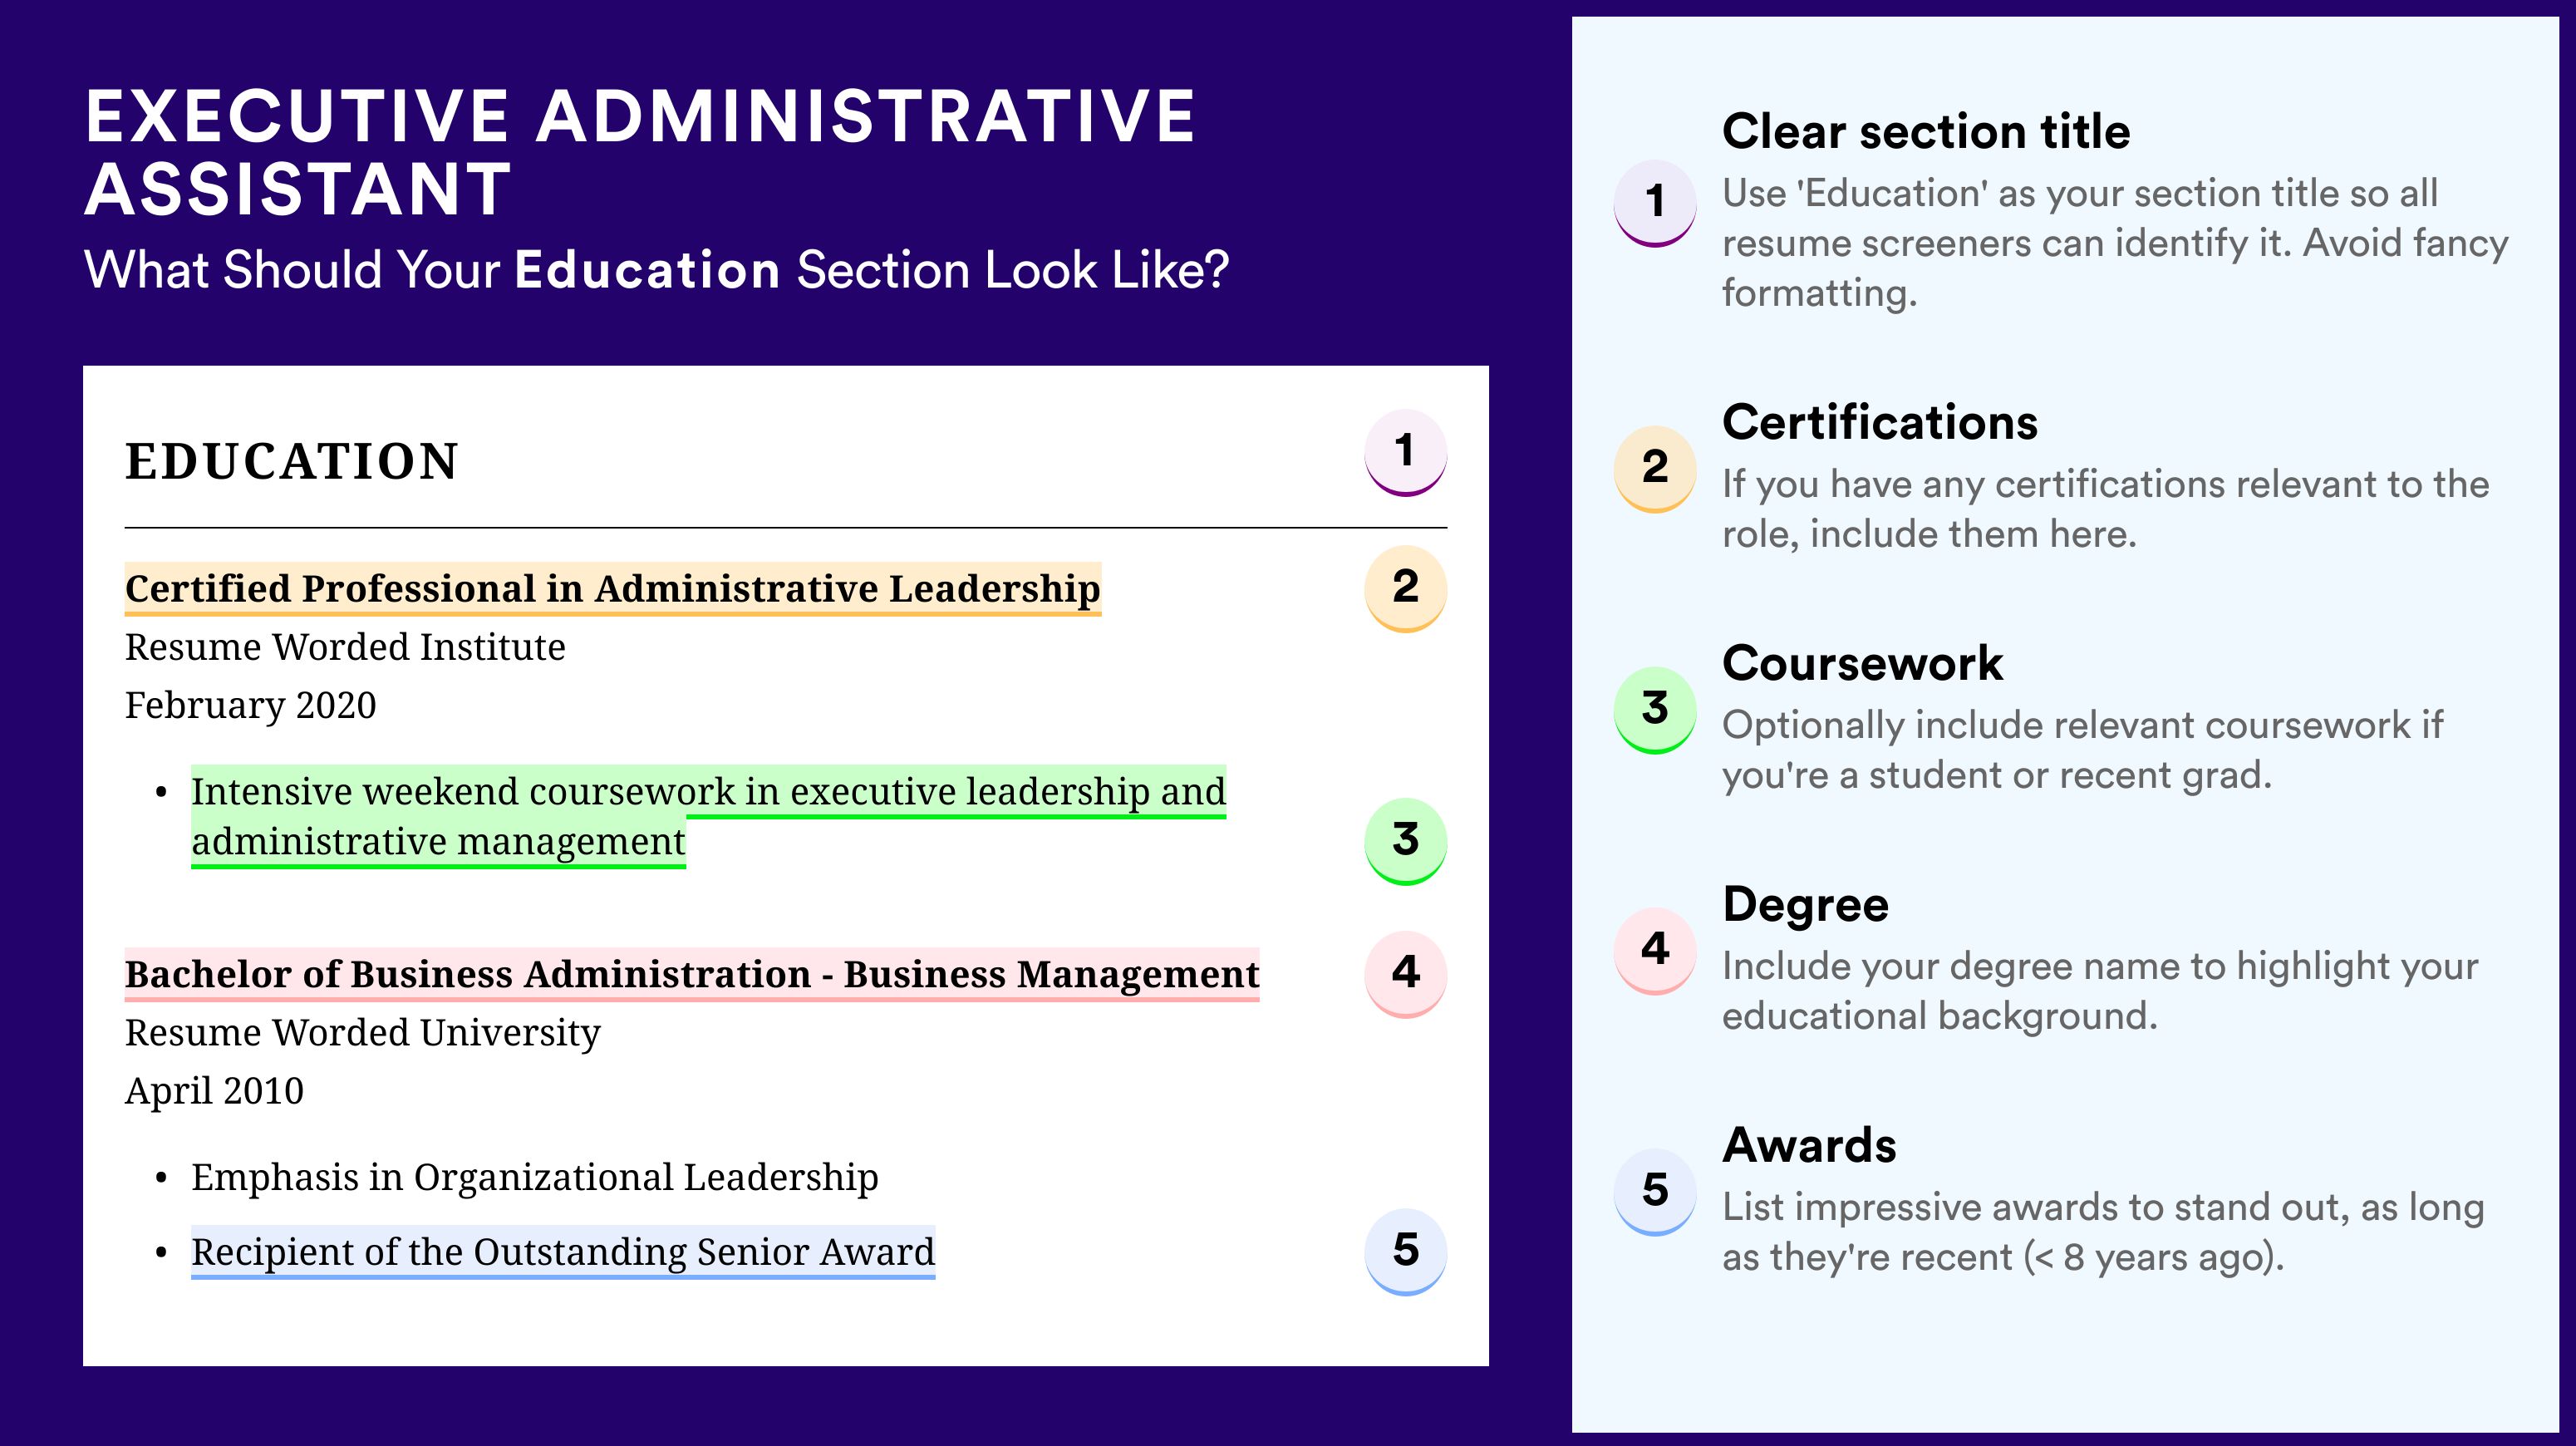 How To Write An Education Section - Executive Administrative Assistant Roles